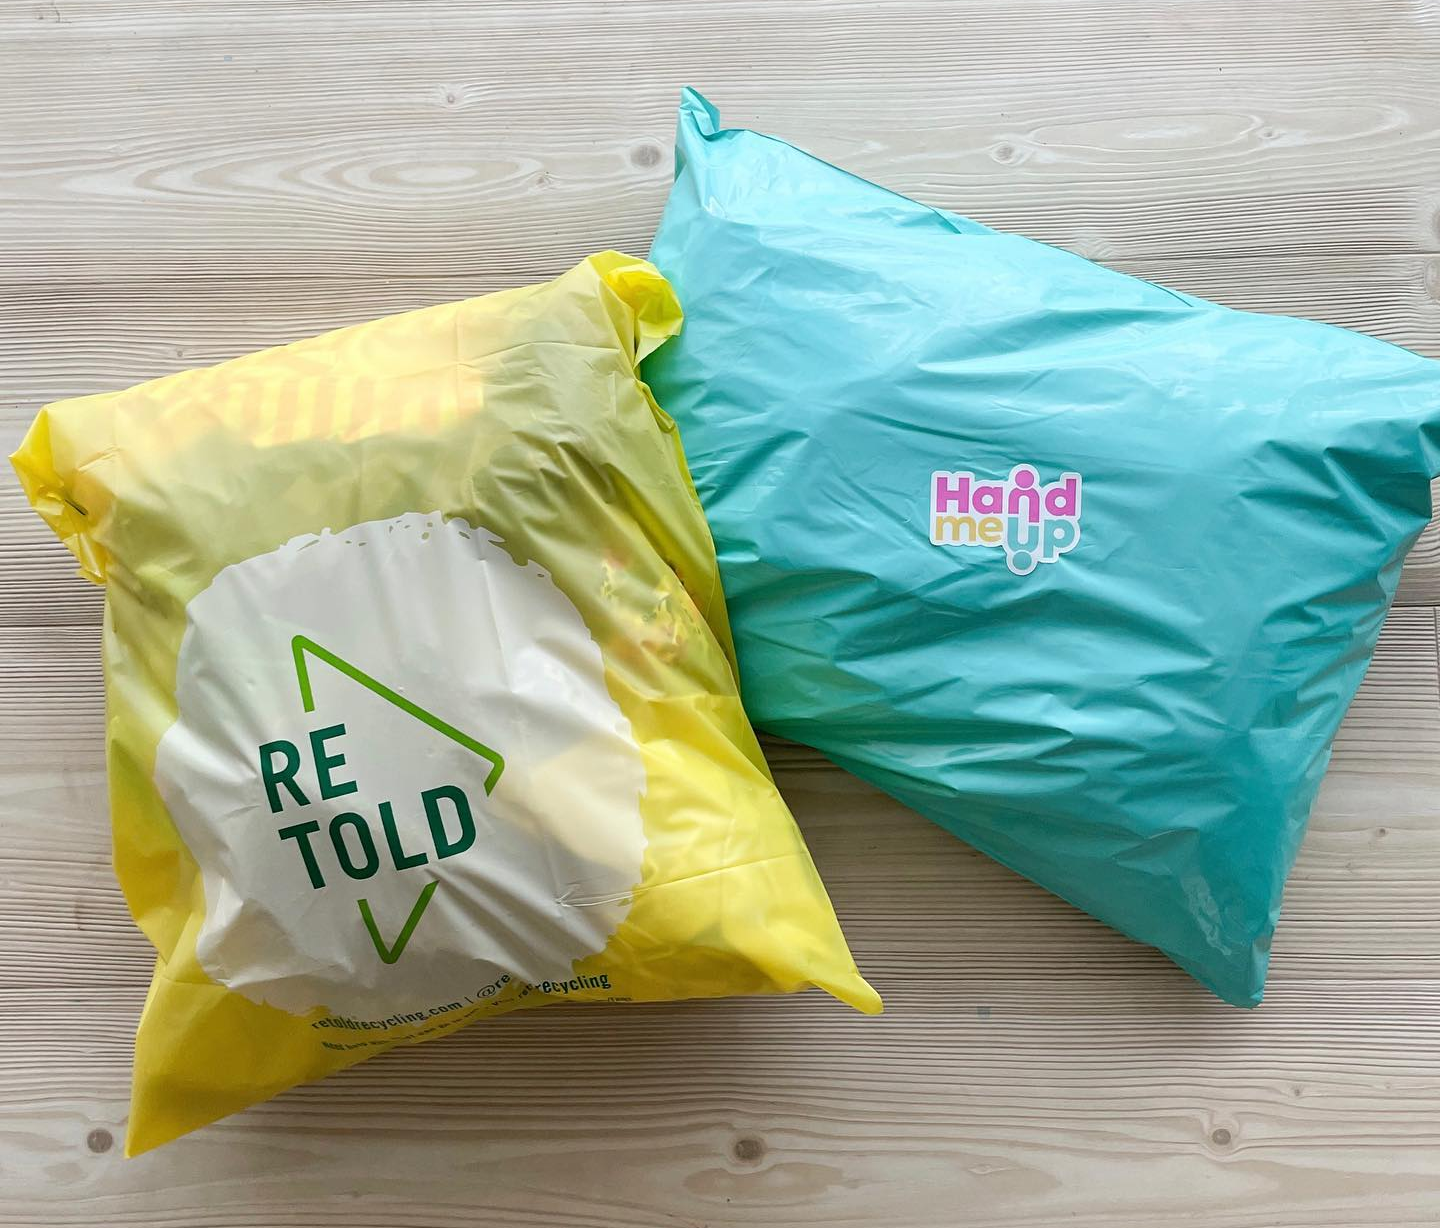 two of the filled recycling bags 